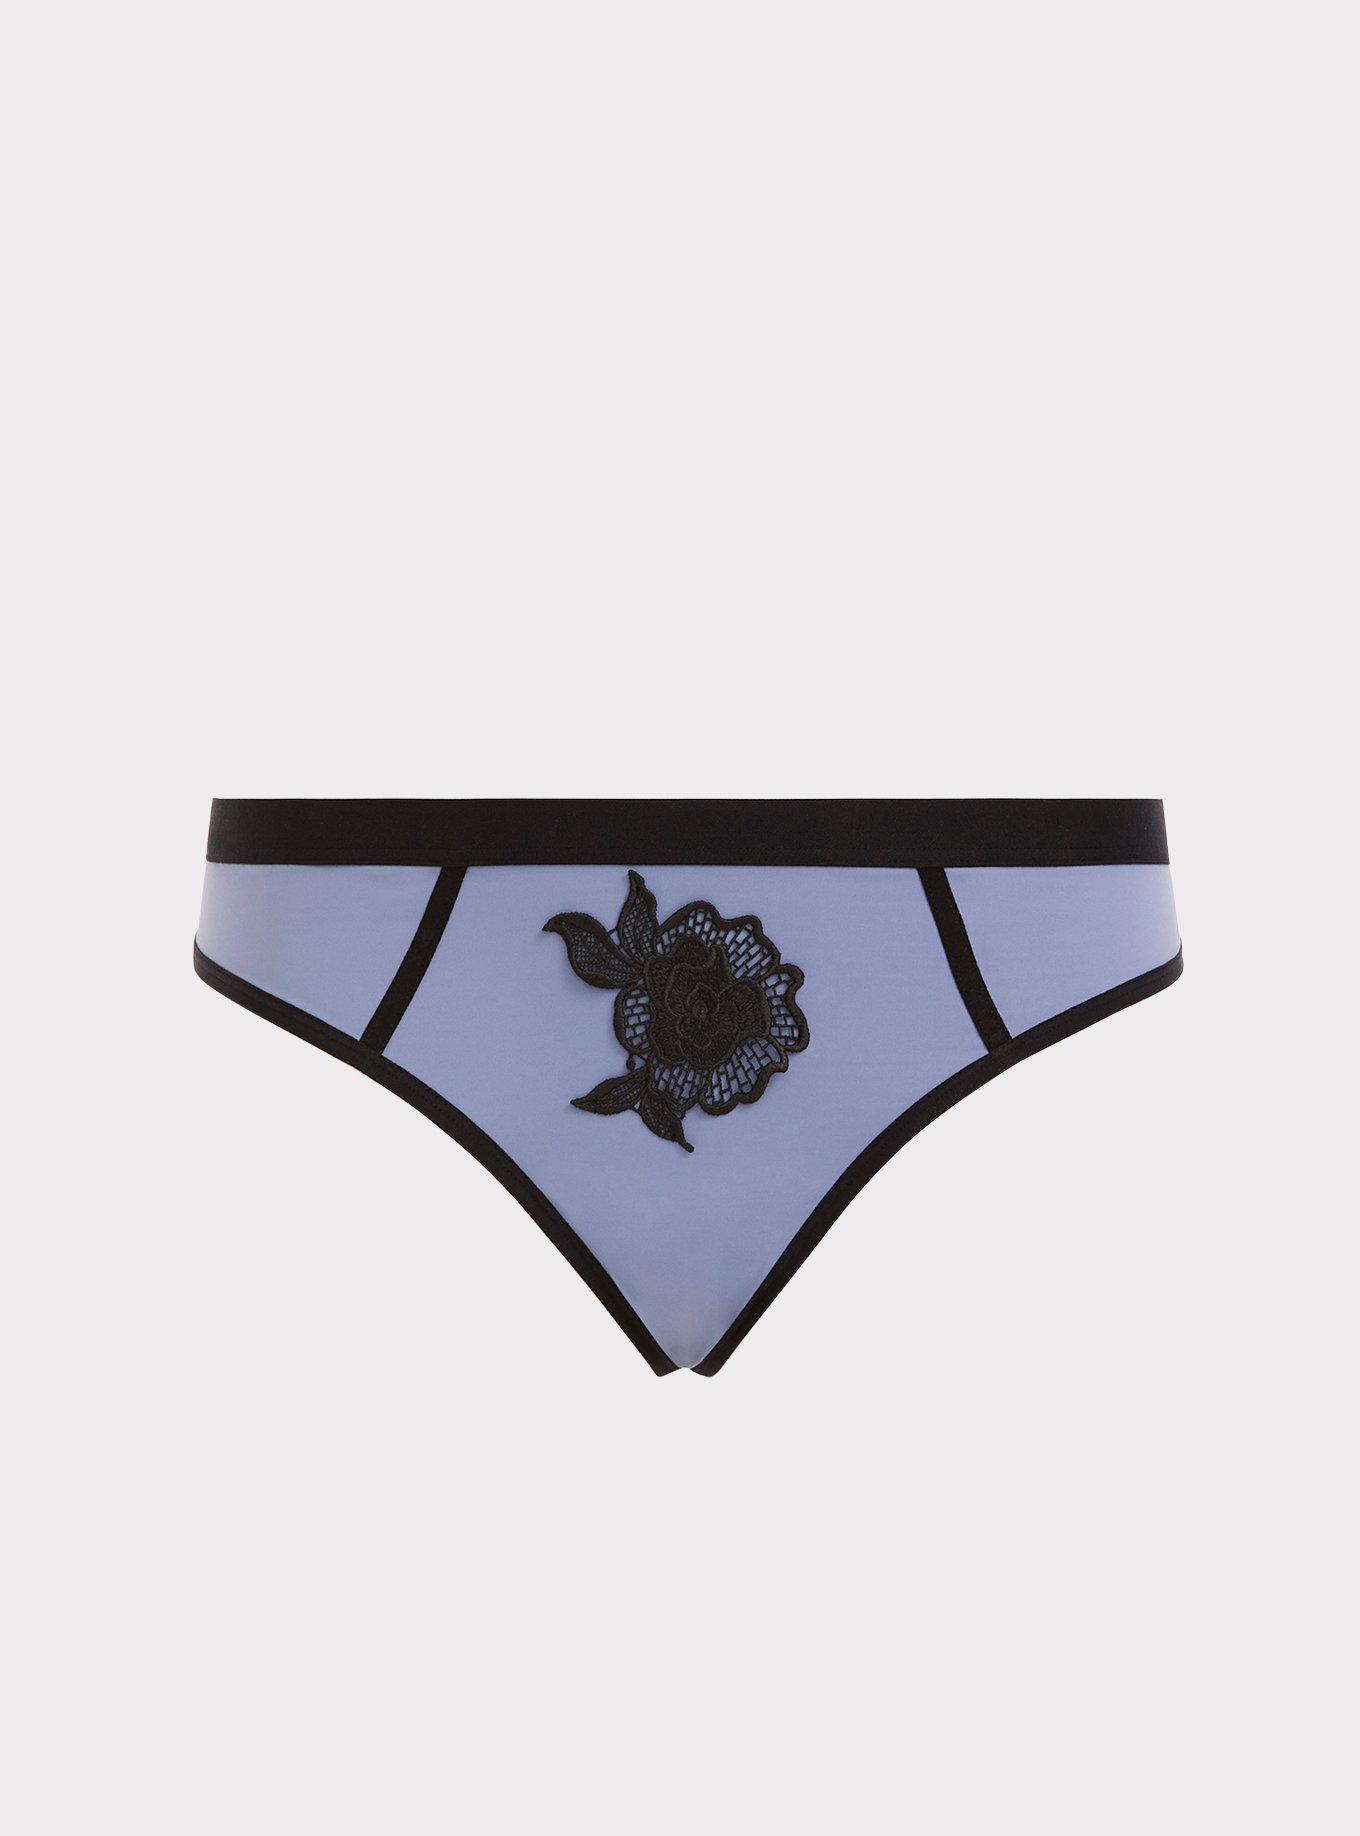 Lacy Line Sexy Cheeky Plus Size Panties With Appliqué 